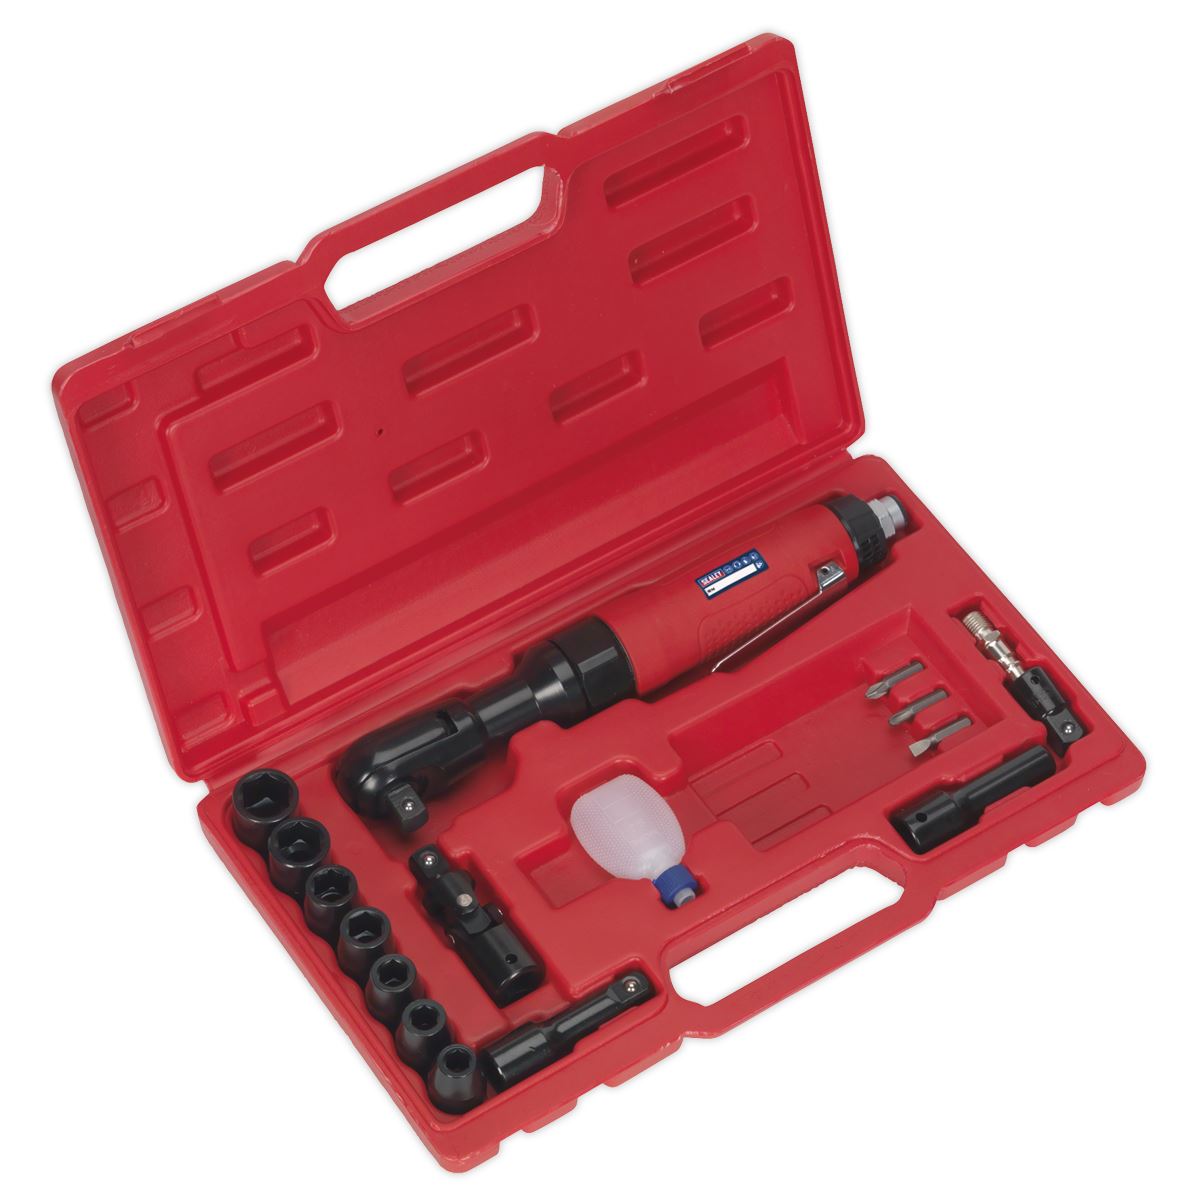 Generation Air Ratchet Wrench Kit 1/2"Sq Drive